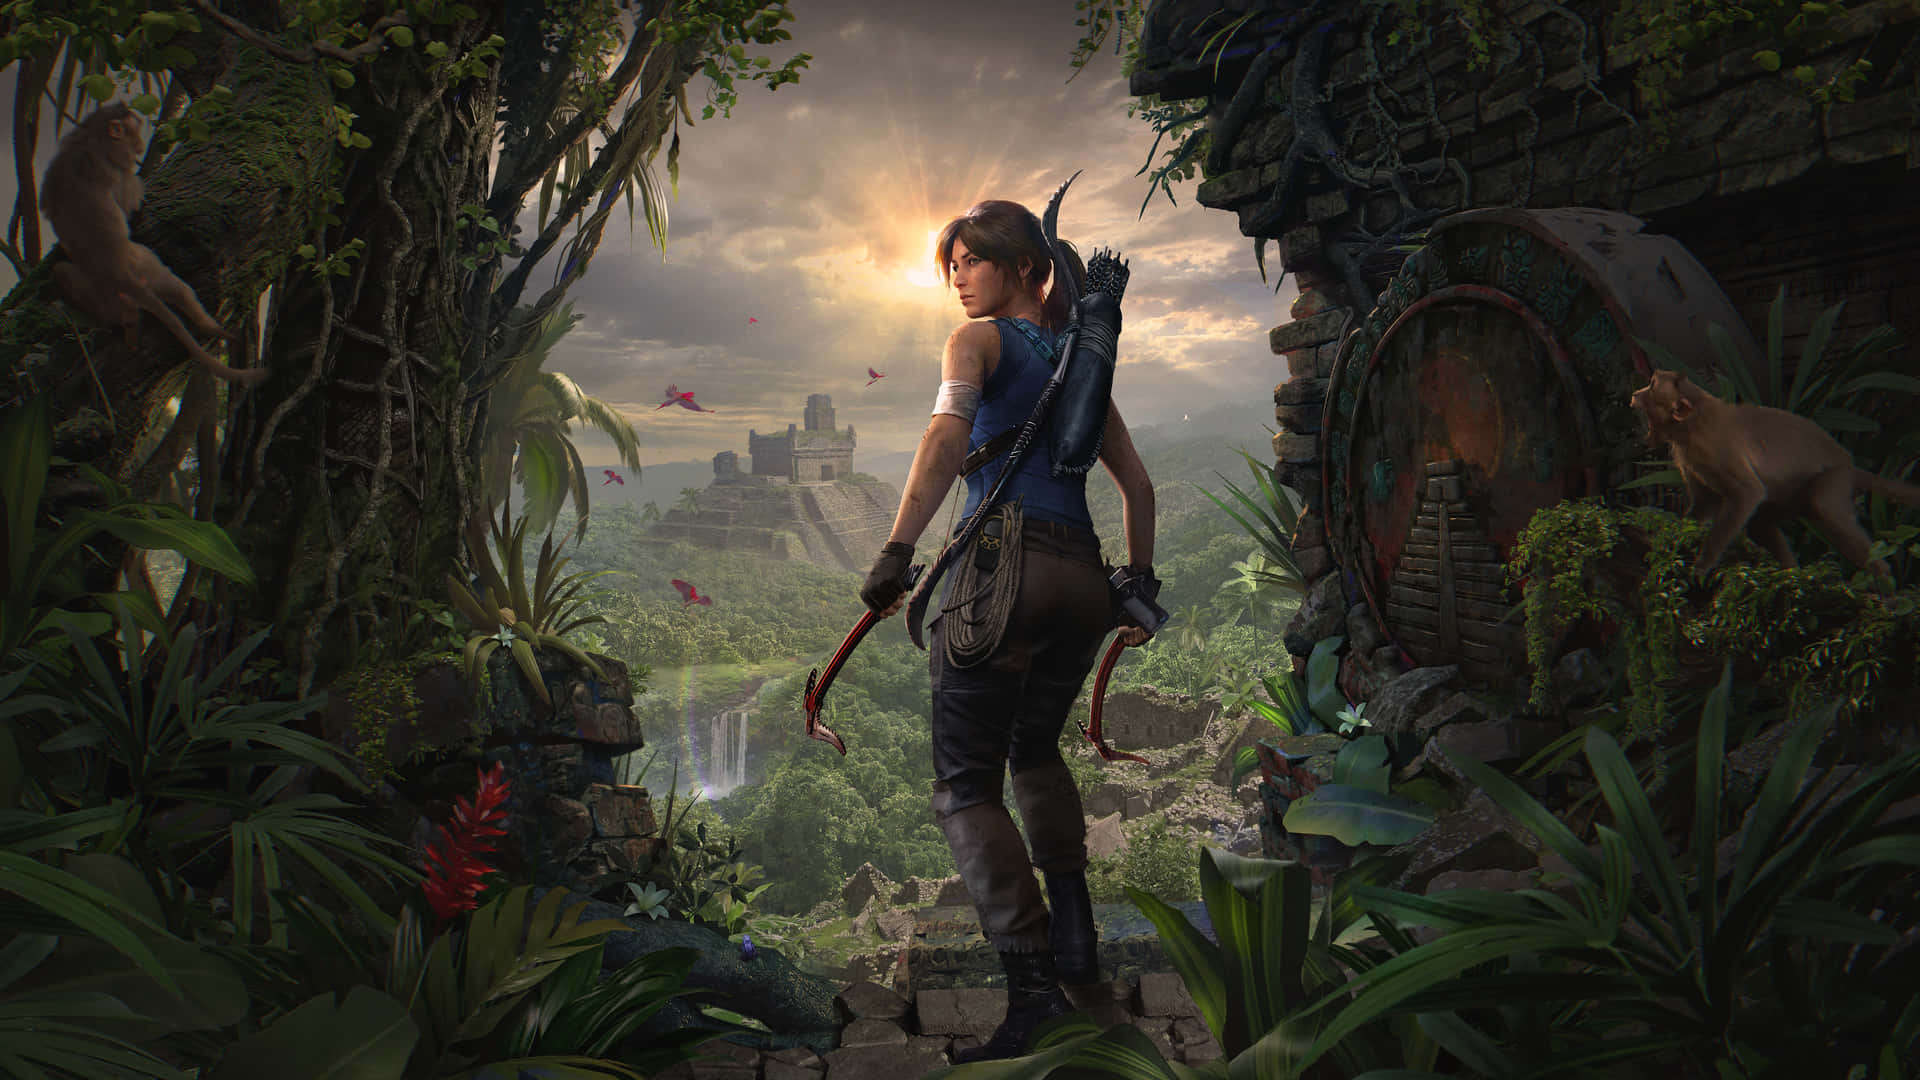 "Stand ready for danger as you explore the ancient tombs of Shadow Of Tomb Raider in search for reckoning." Wallpaper